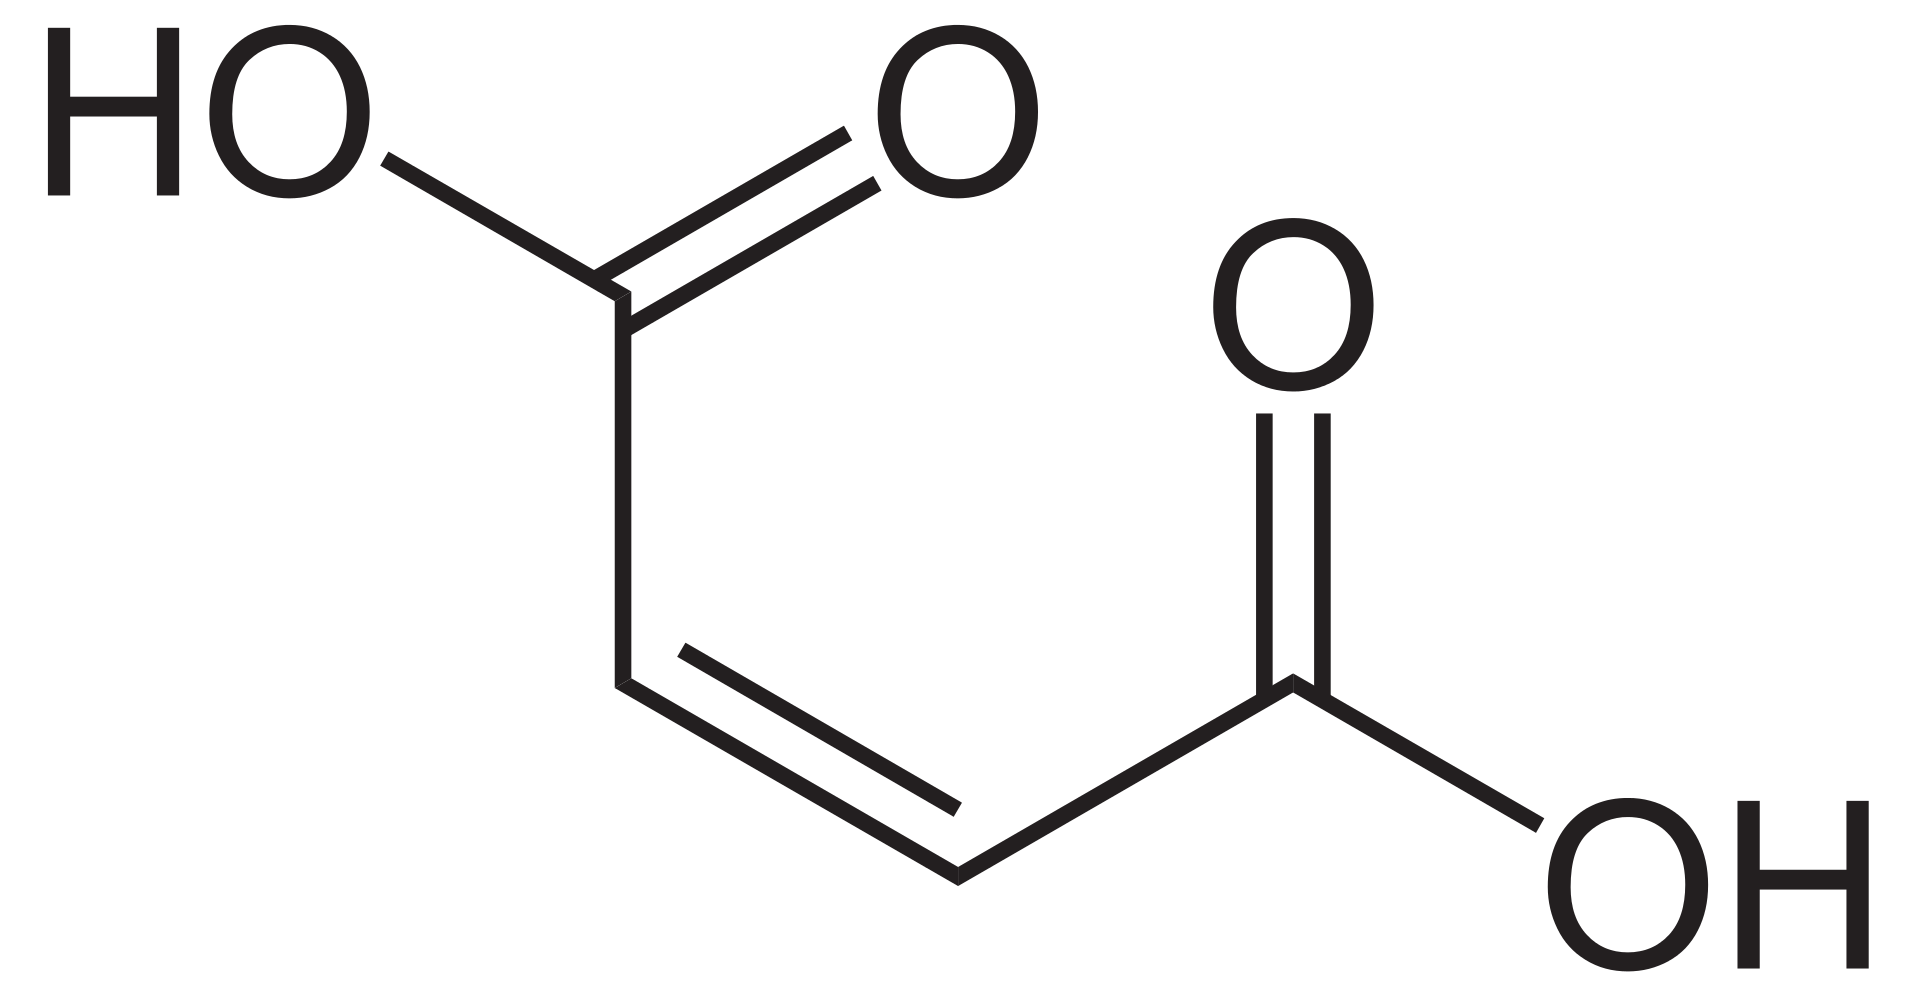 Molecular structure of maleic acid